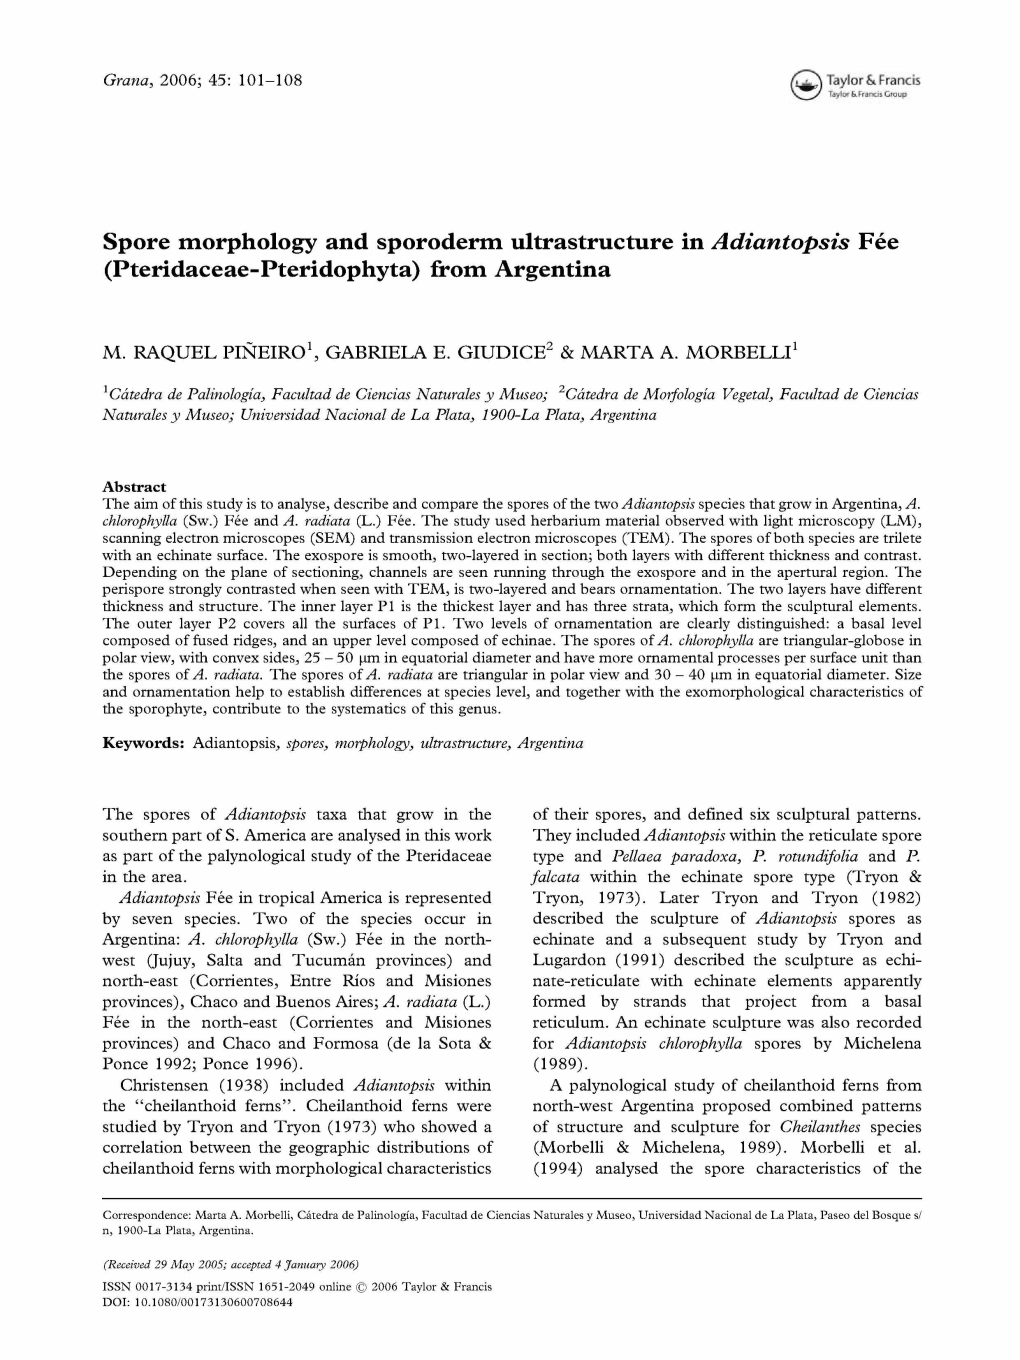 Spore Morphology and Sporoderm Ultrastructure in Adiantopsis Fe´E (Pteridaceae-Pteridophyta) from Argentina